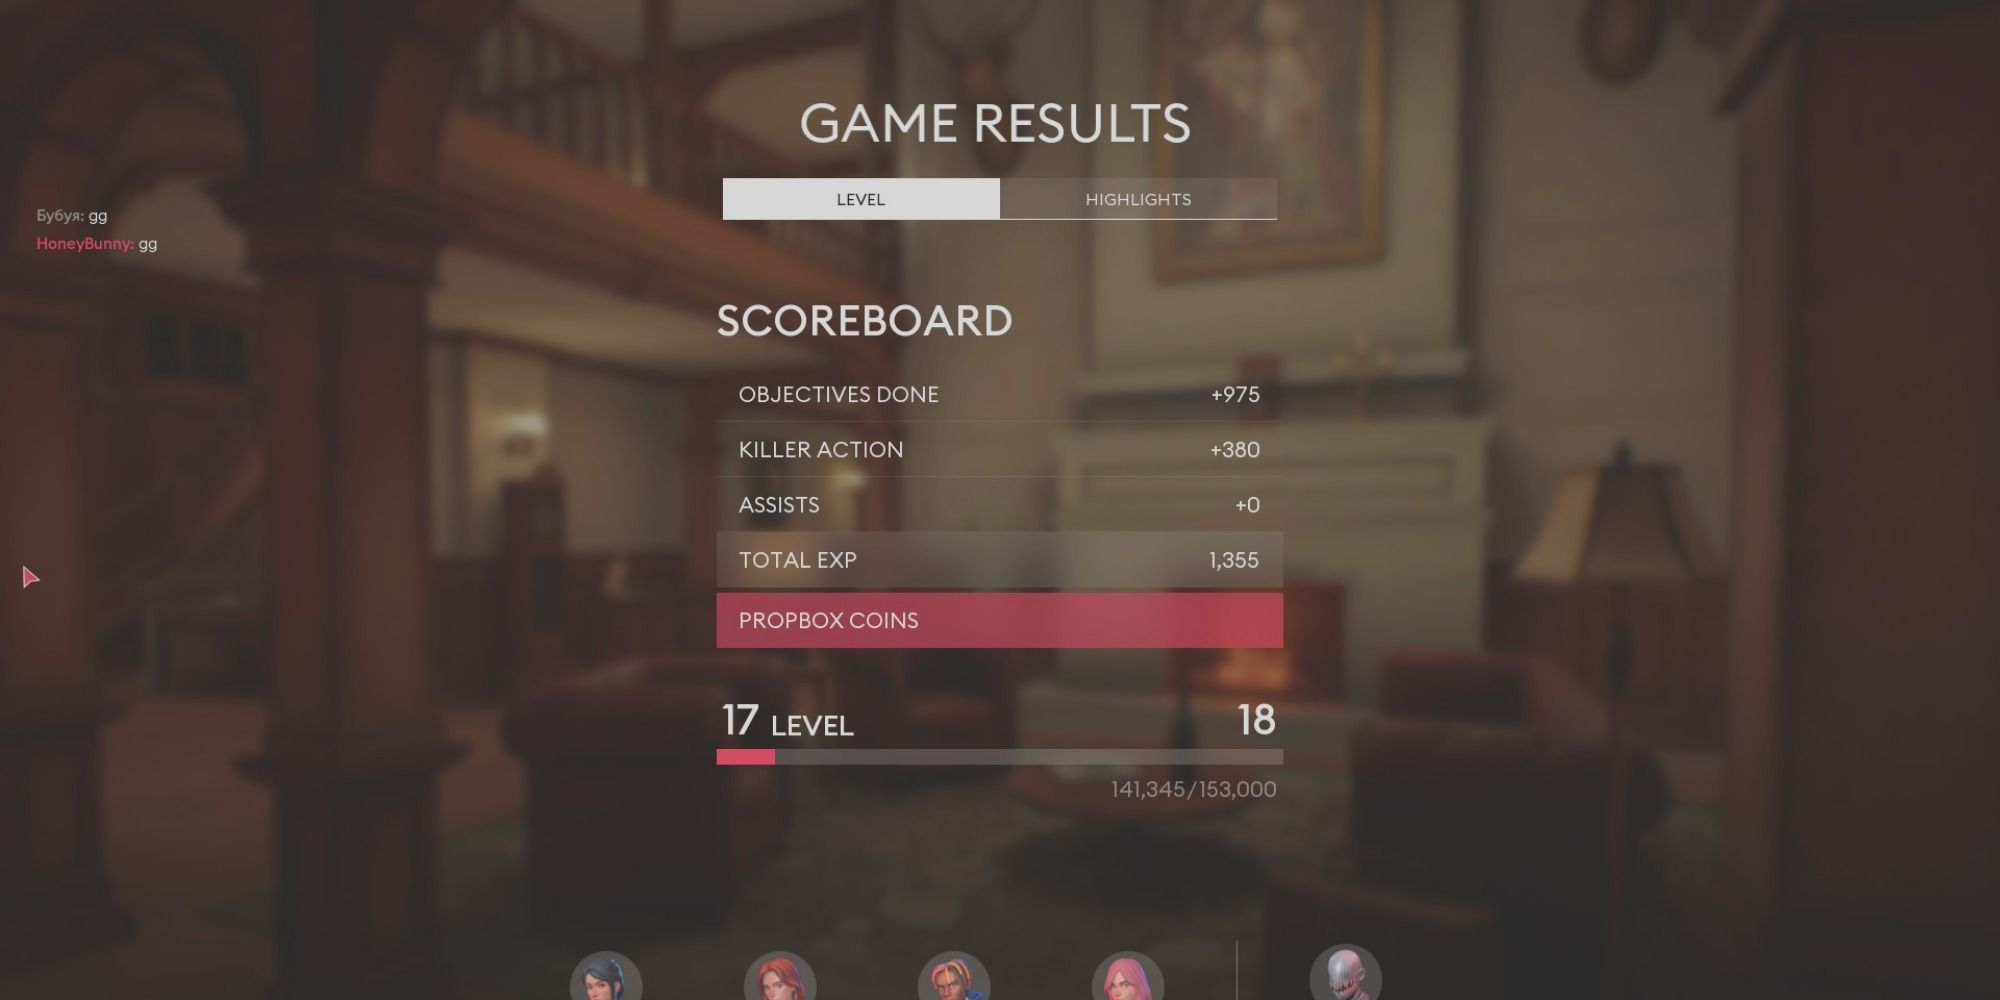 The game results show the scoreboard and XP gained after a match in the House